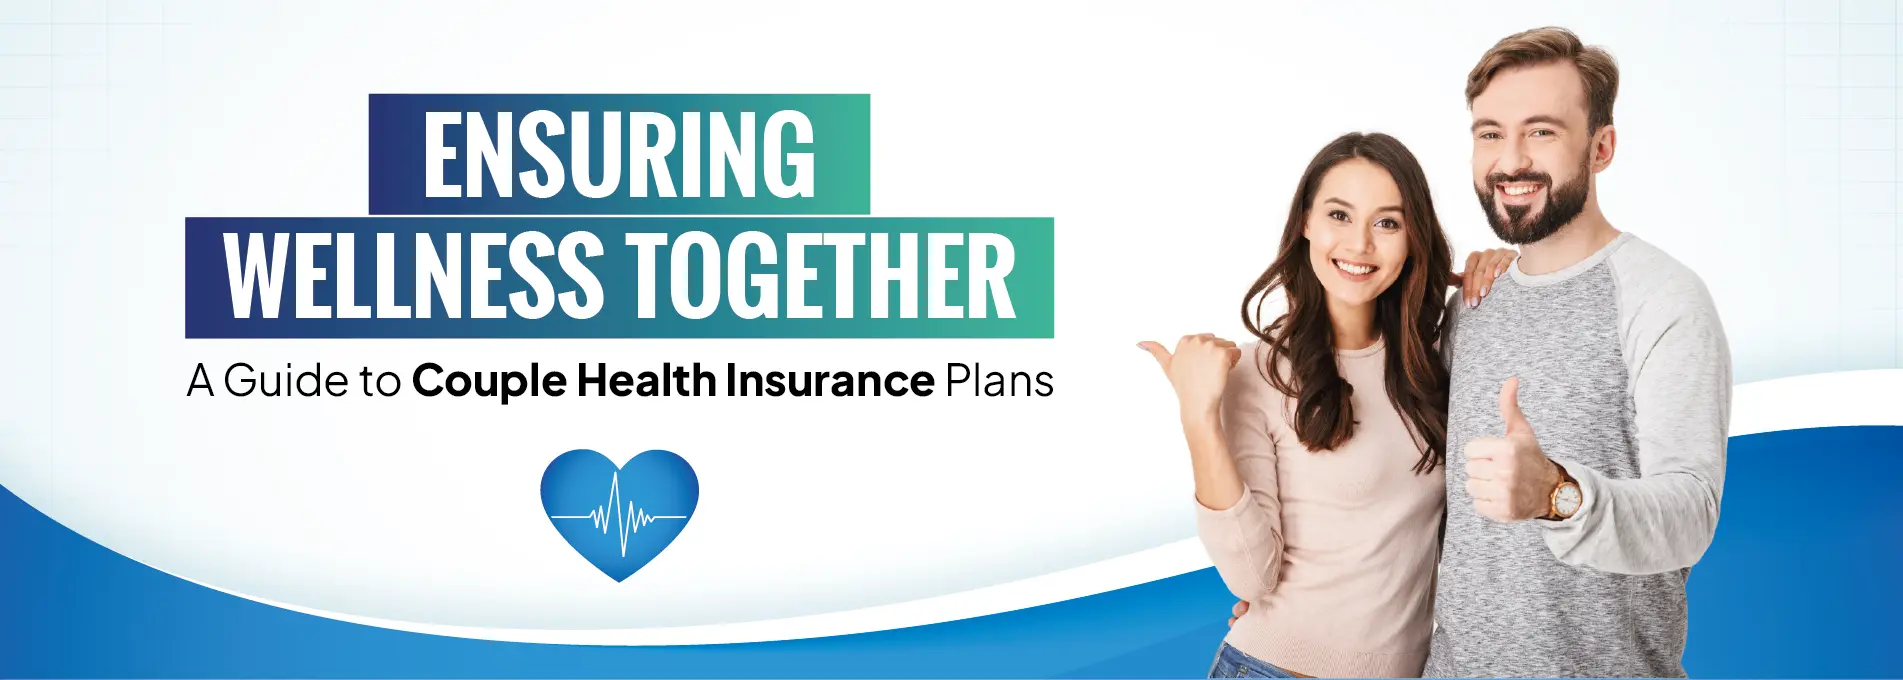 Ensuring Wellness Together: A Guide to Couple Health Insurance Plans